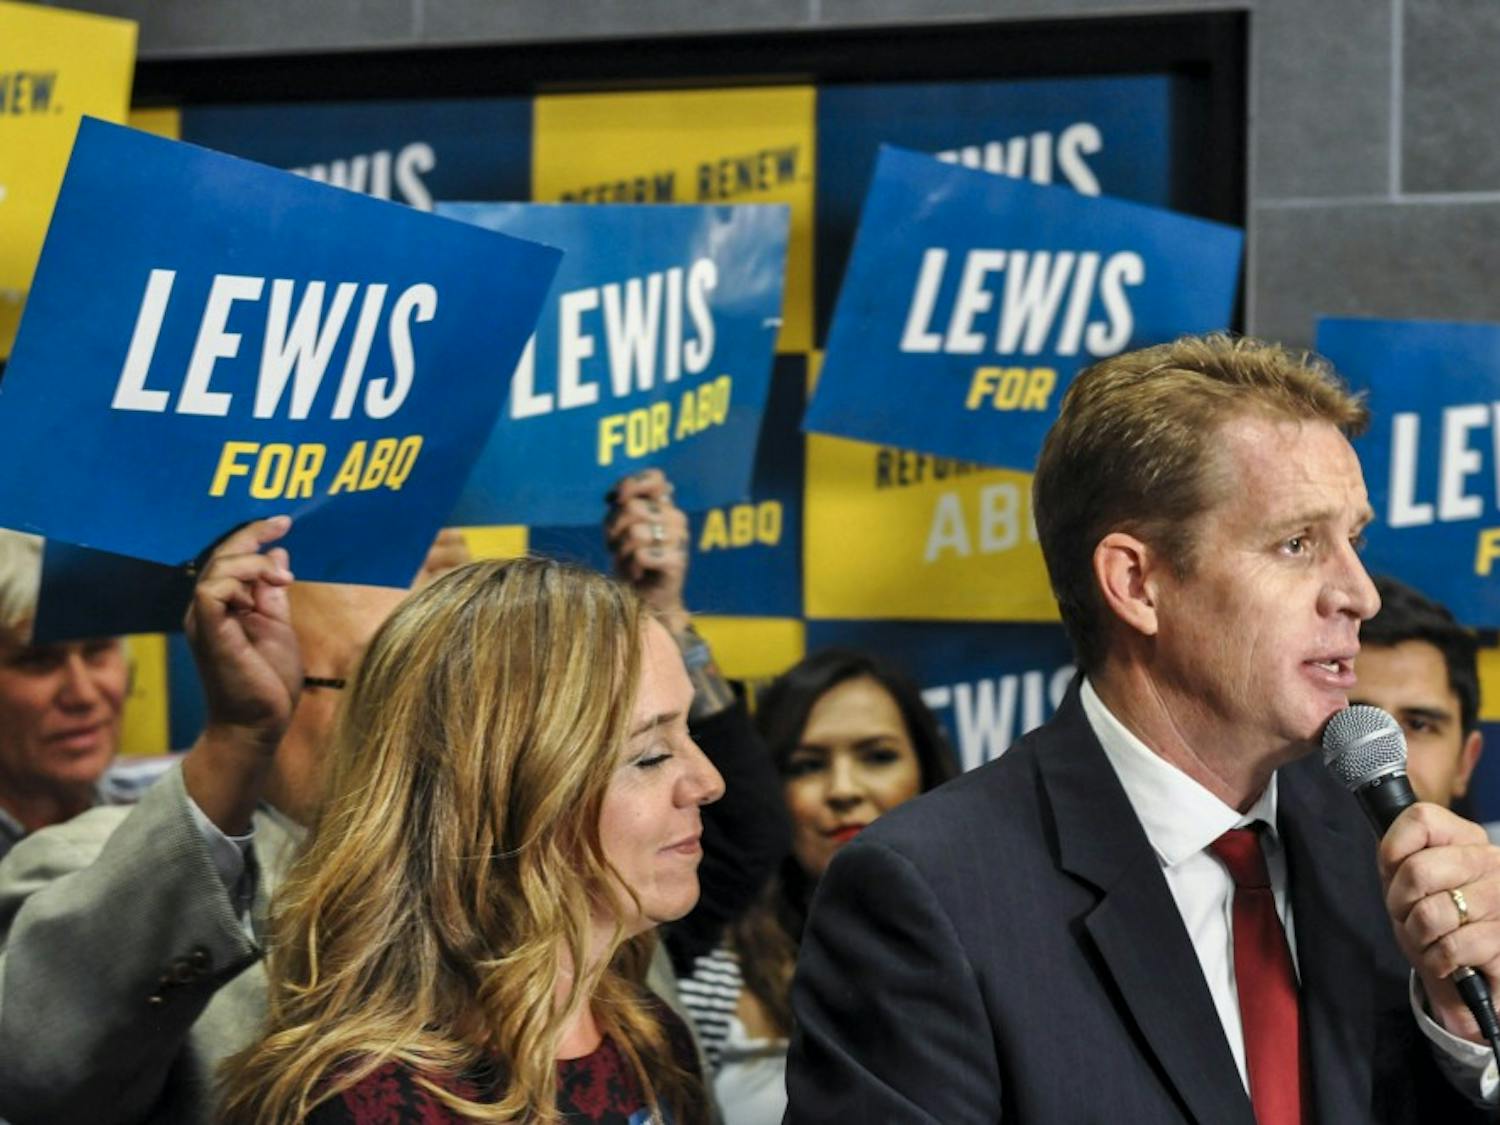 Candidate for Mayor and City Councilor Dan Lewis speaks during an election viewing event at Flix Brewhouse on October 3, 2017 as his wife Tracy Lewis (left) listens on.